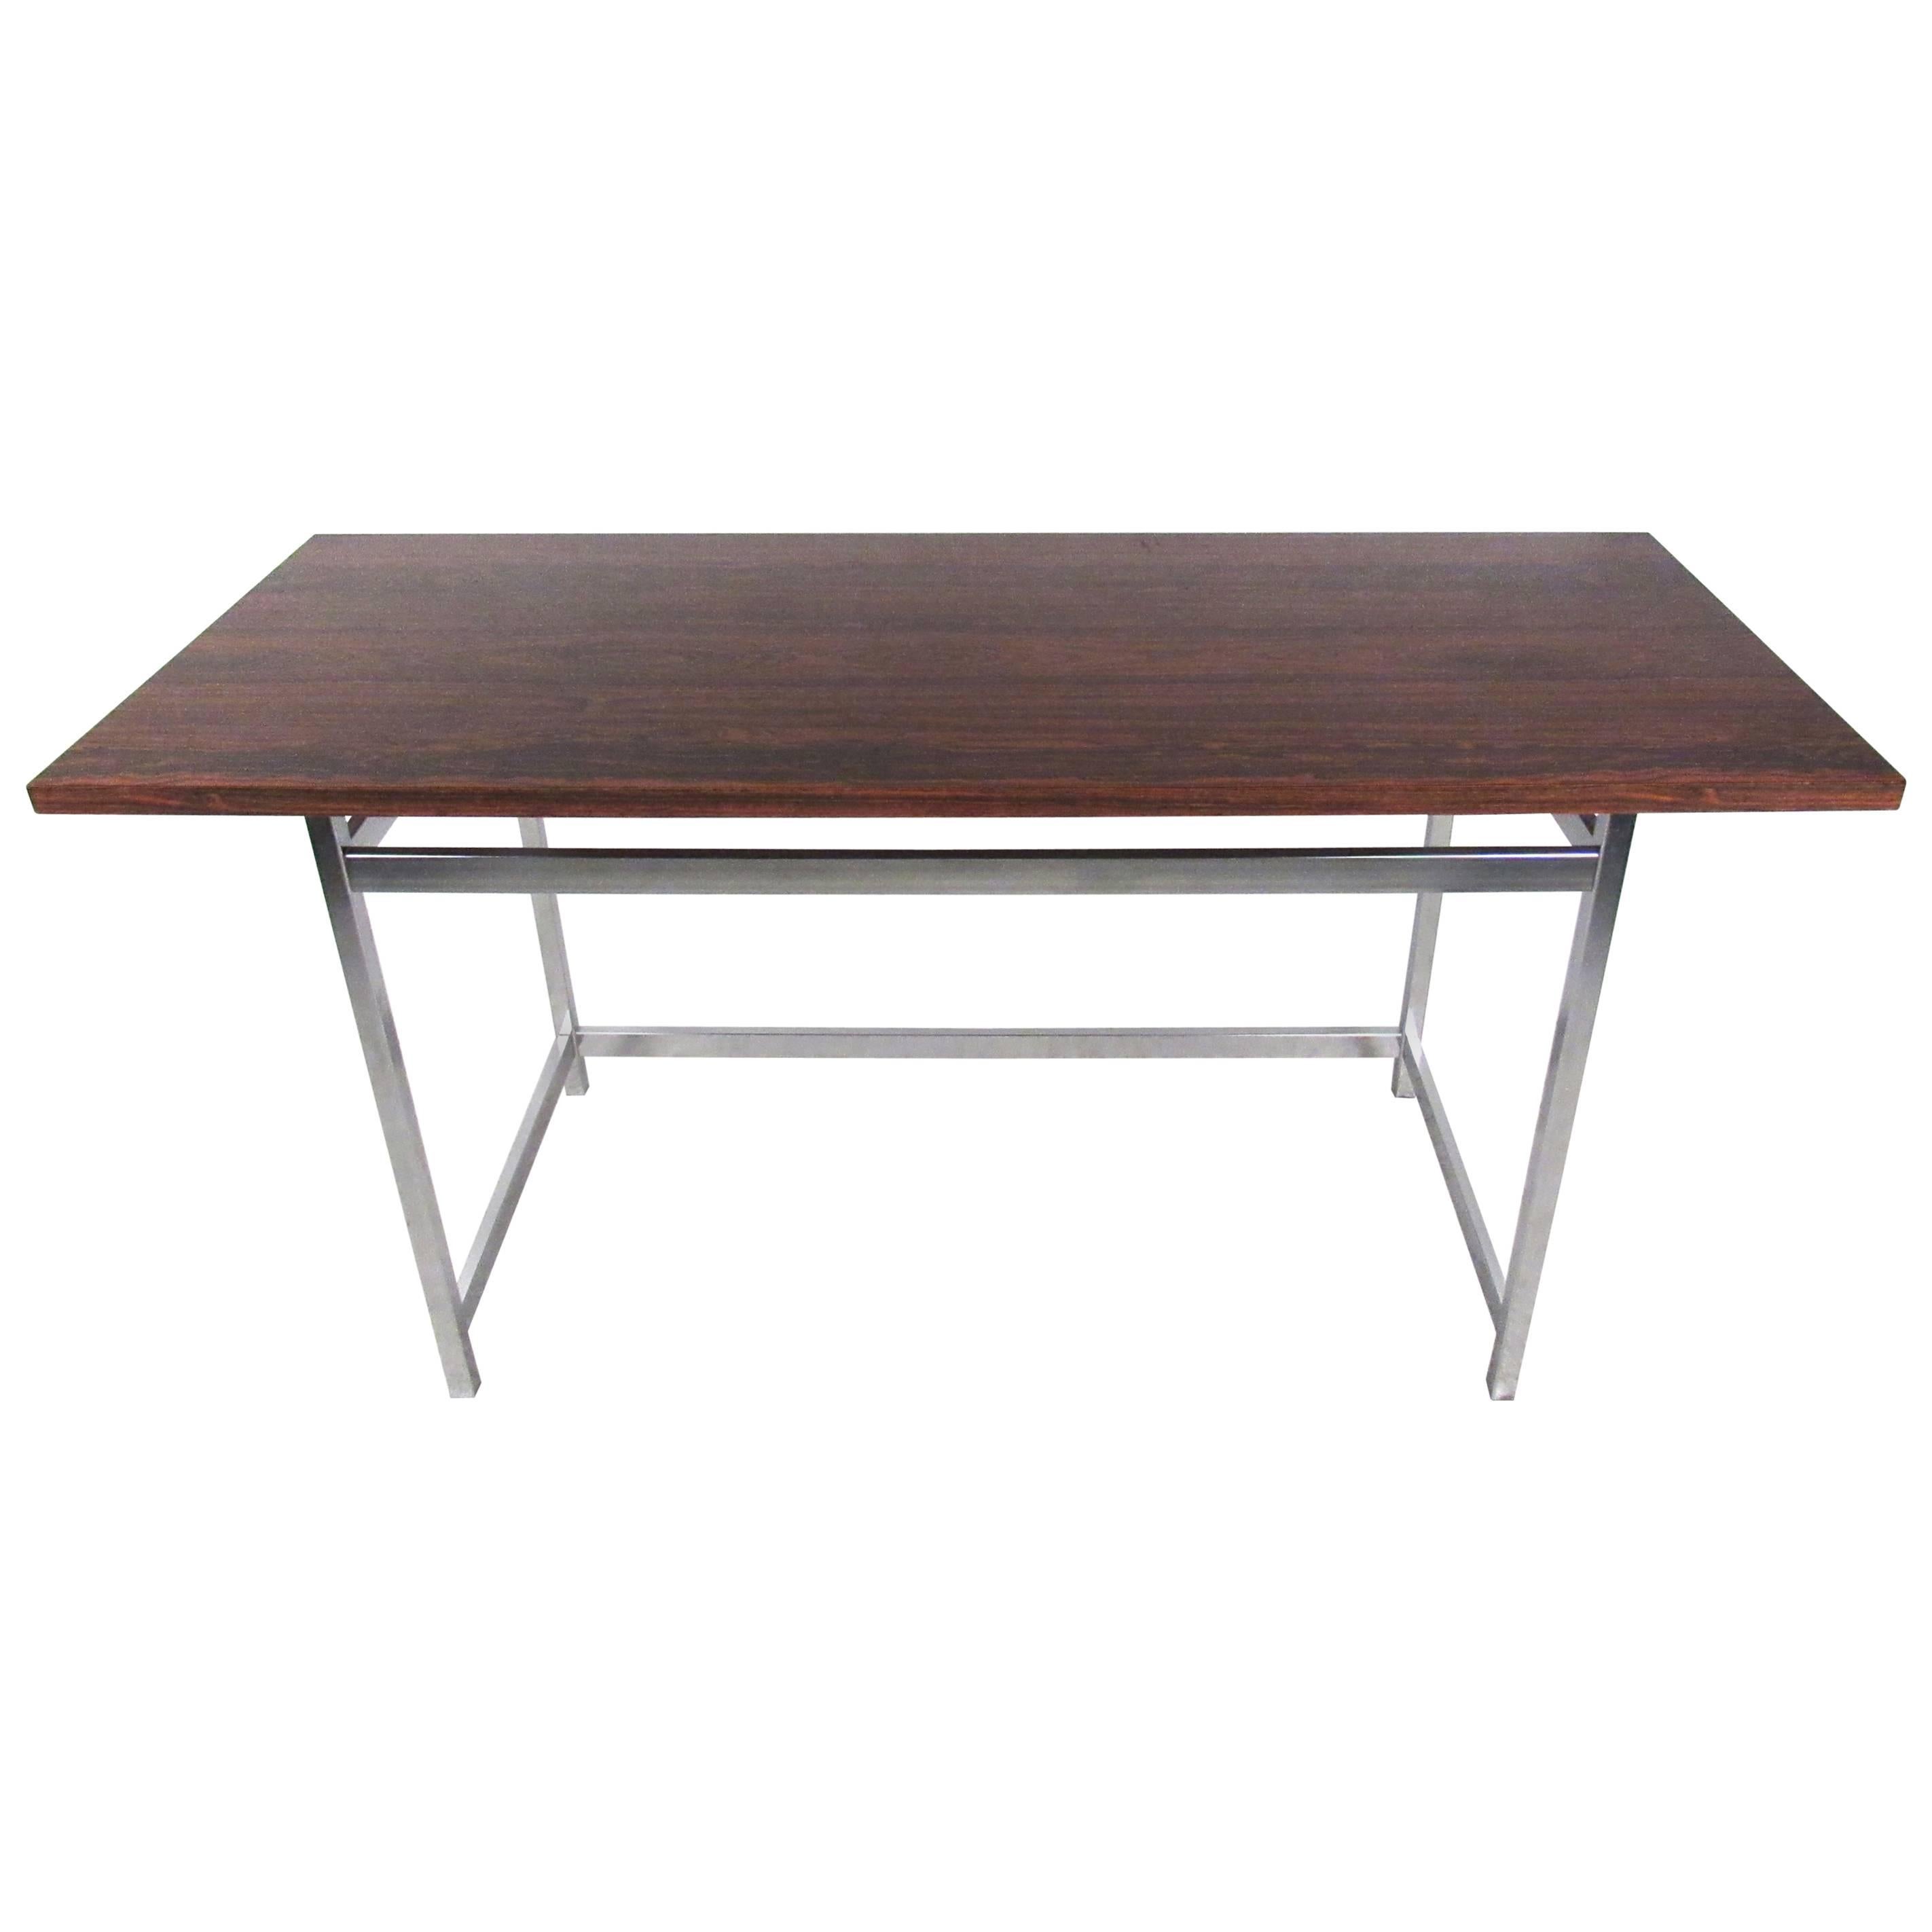 Mid-Century Modern Rosewood and Chrome Console Table